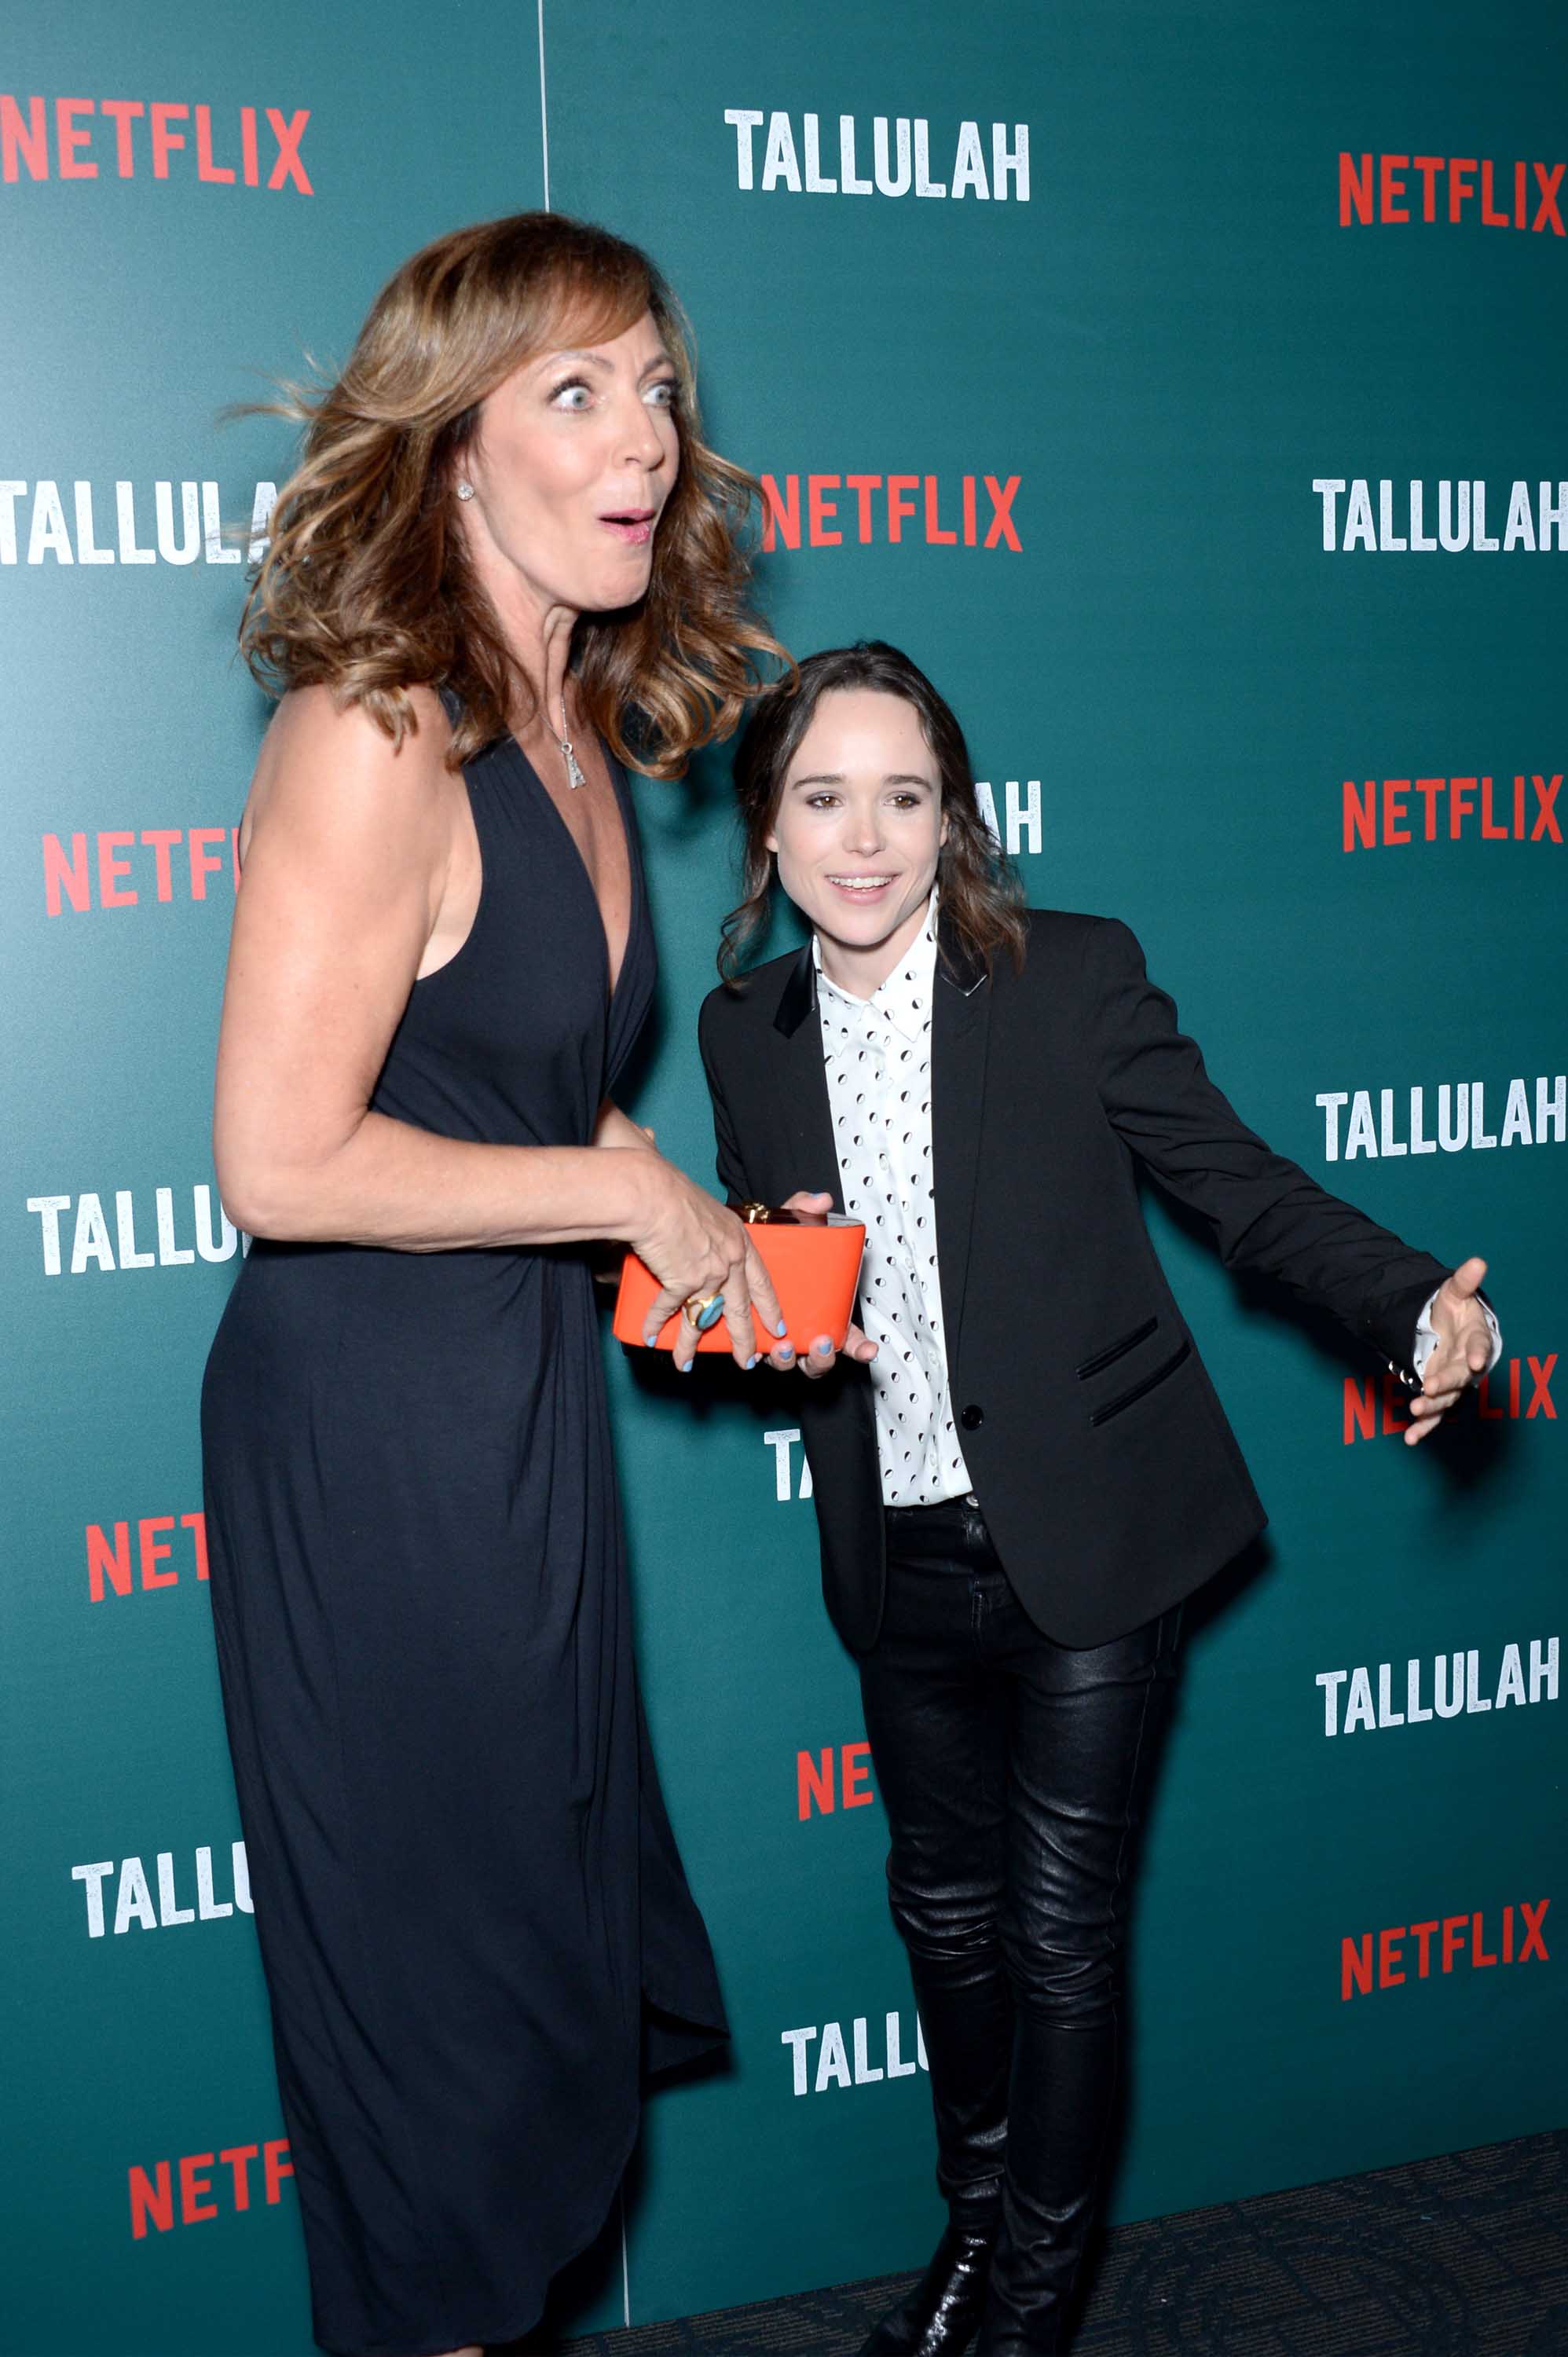 Ellen Page attends a special screening of Tallulah